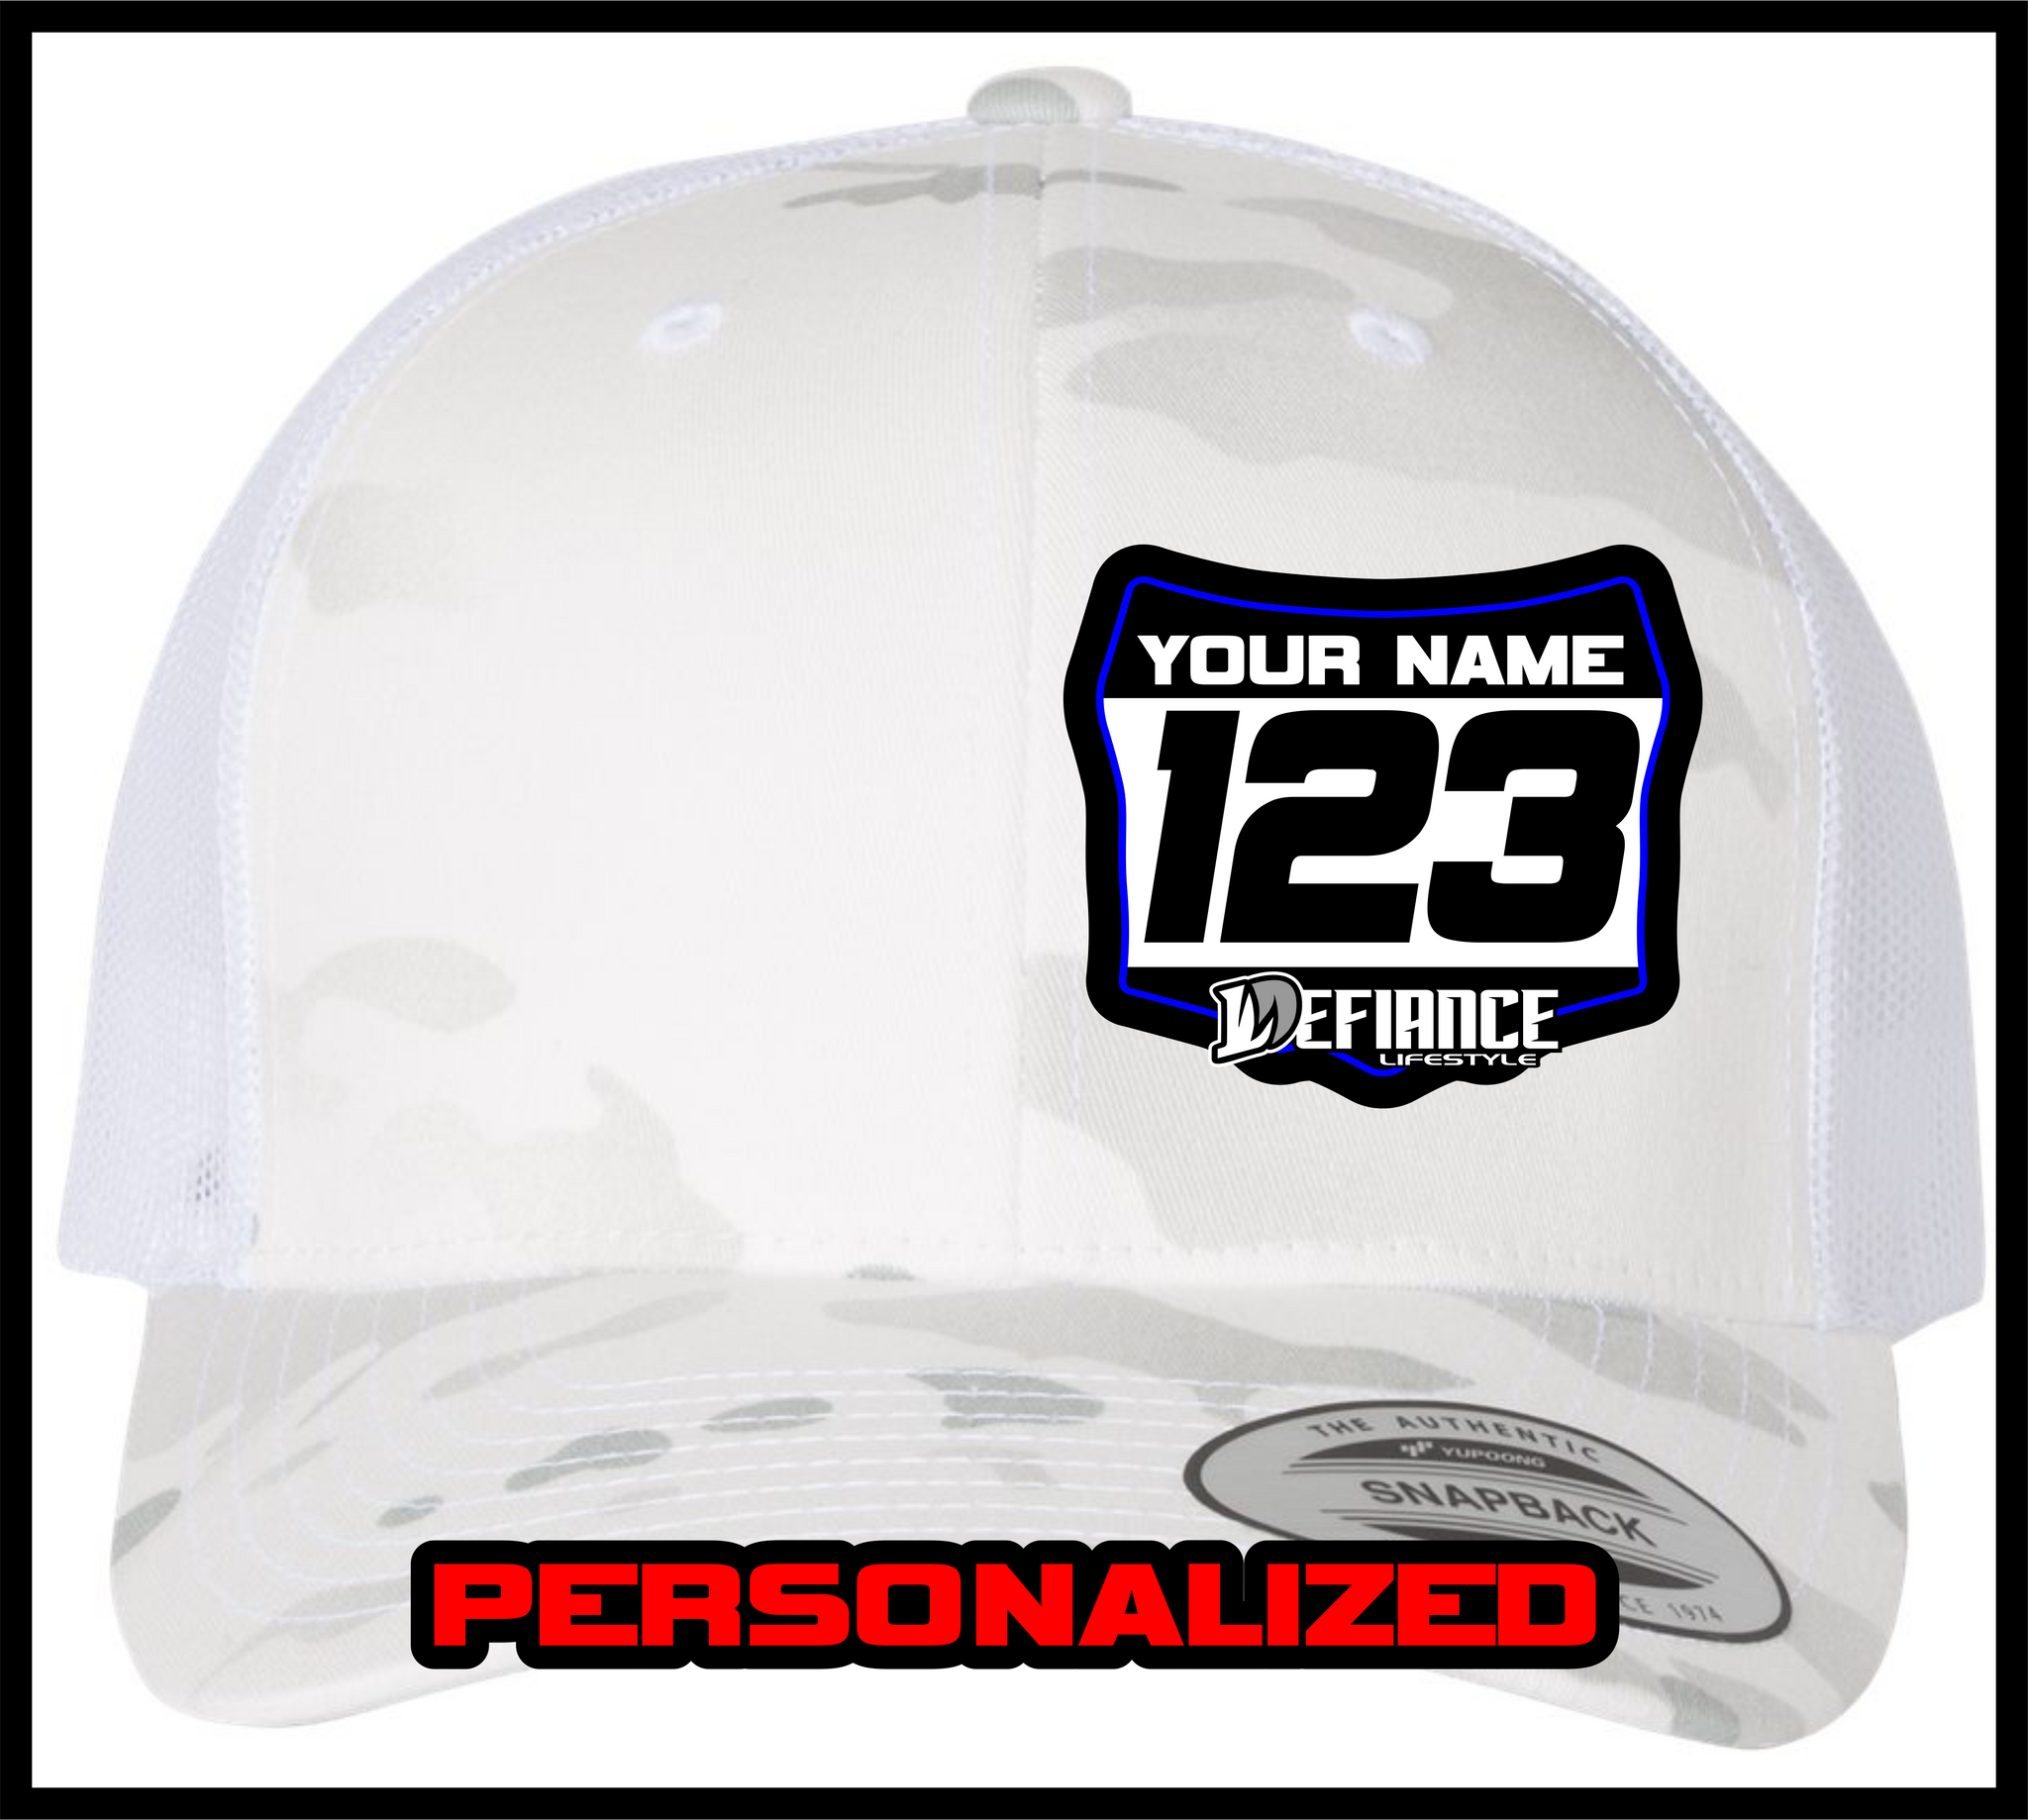 Race Hat with Personalized Number Plate - white Camo